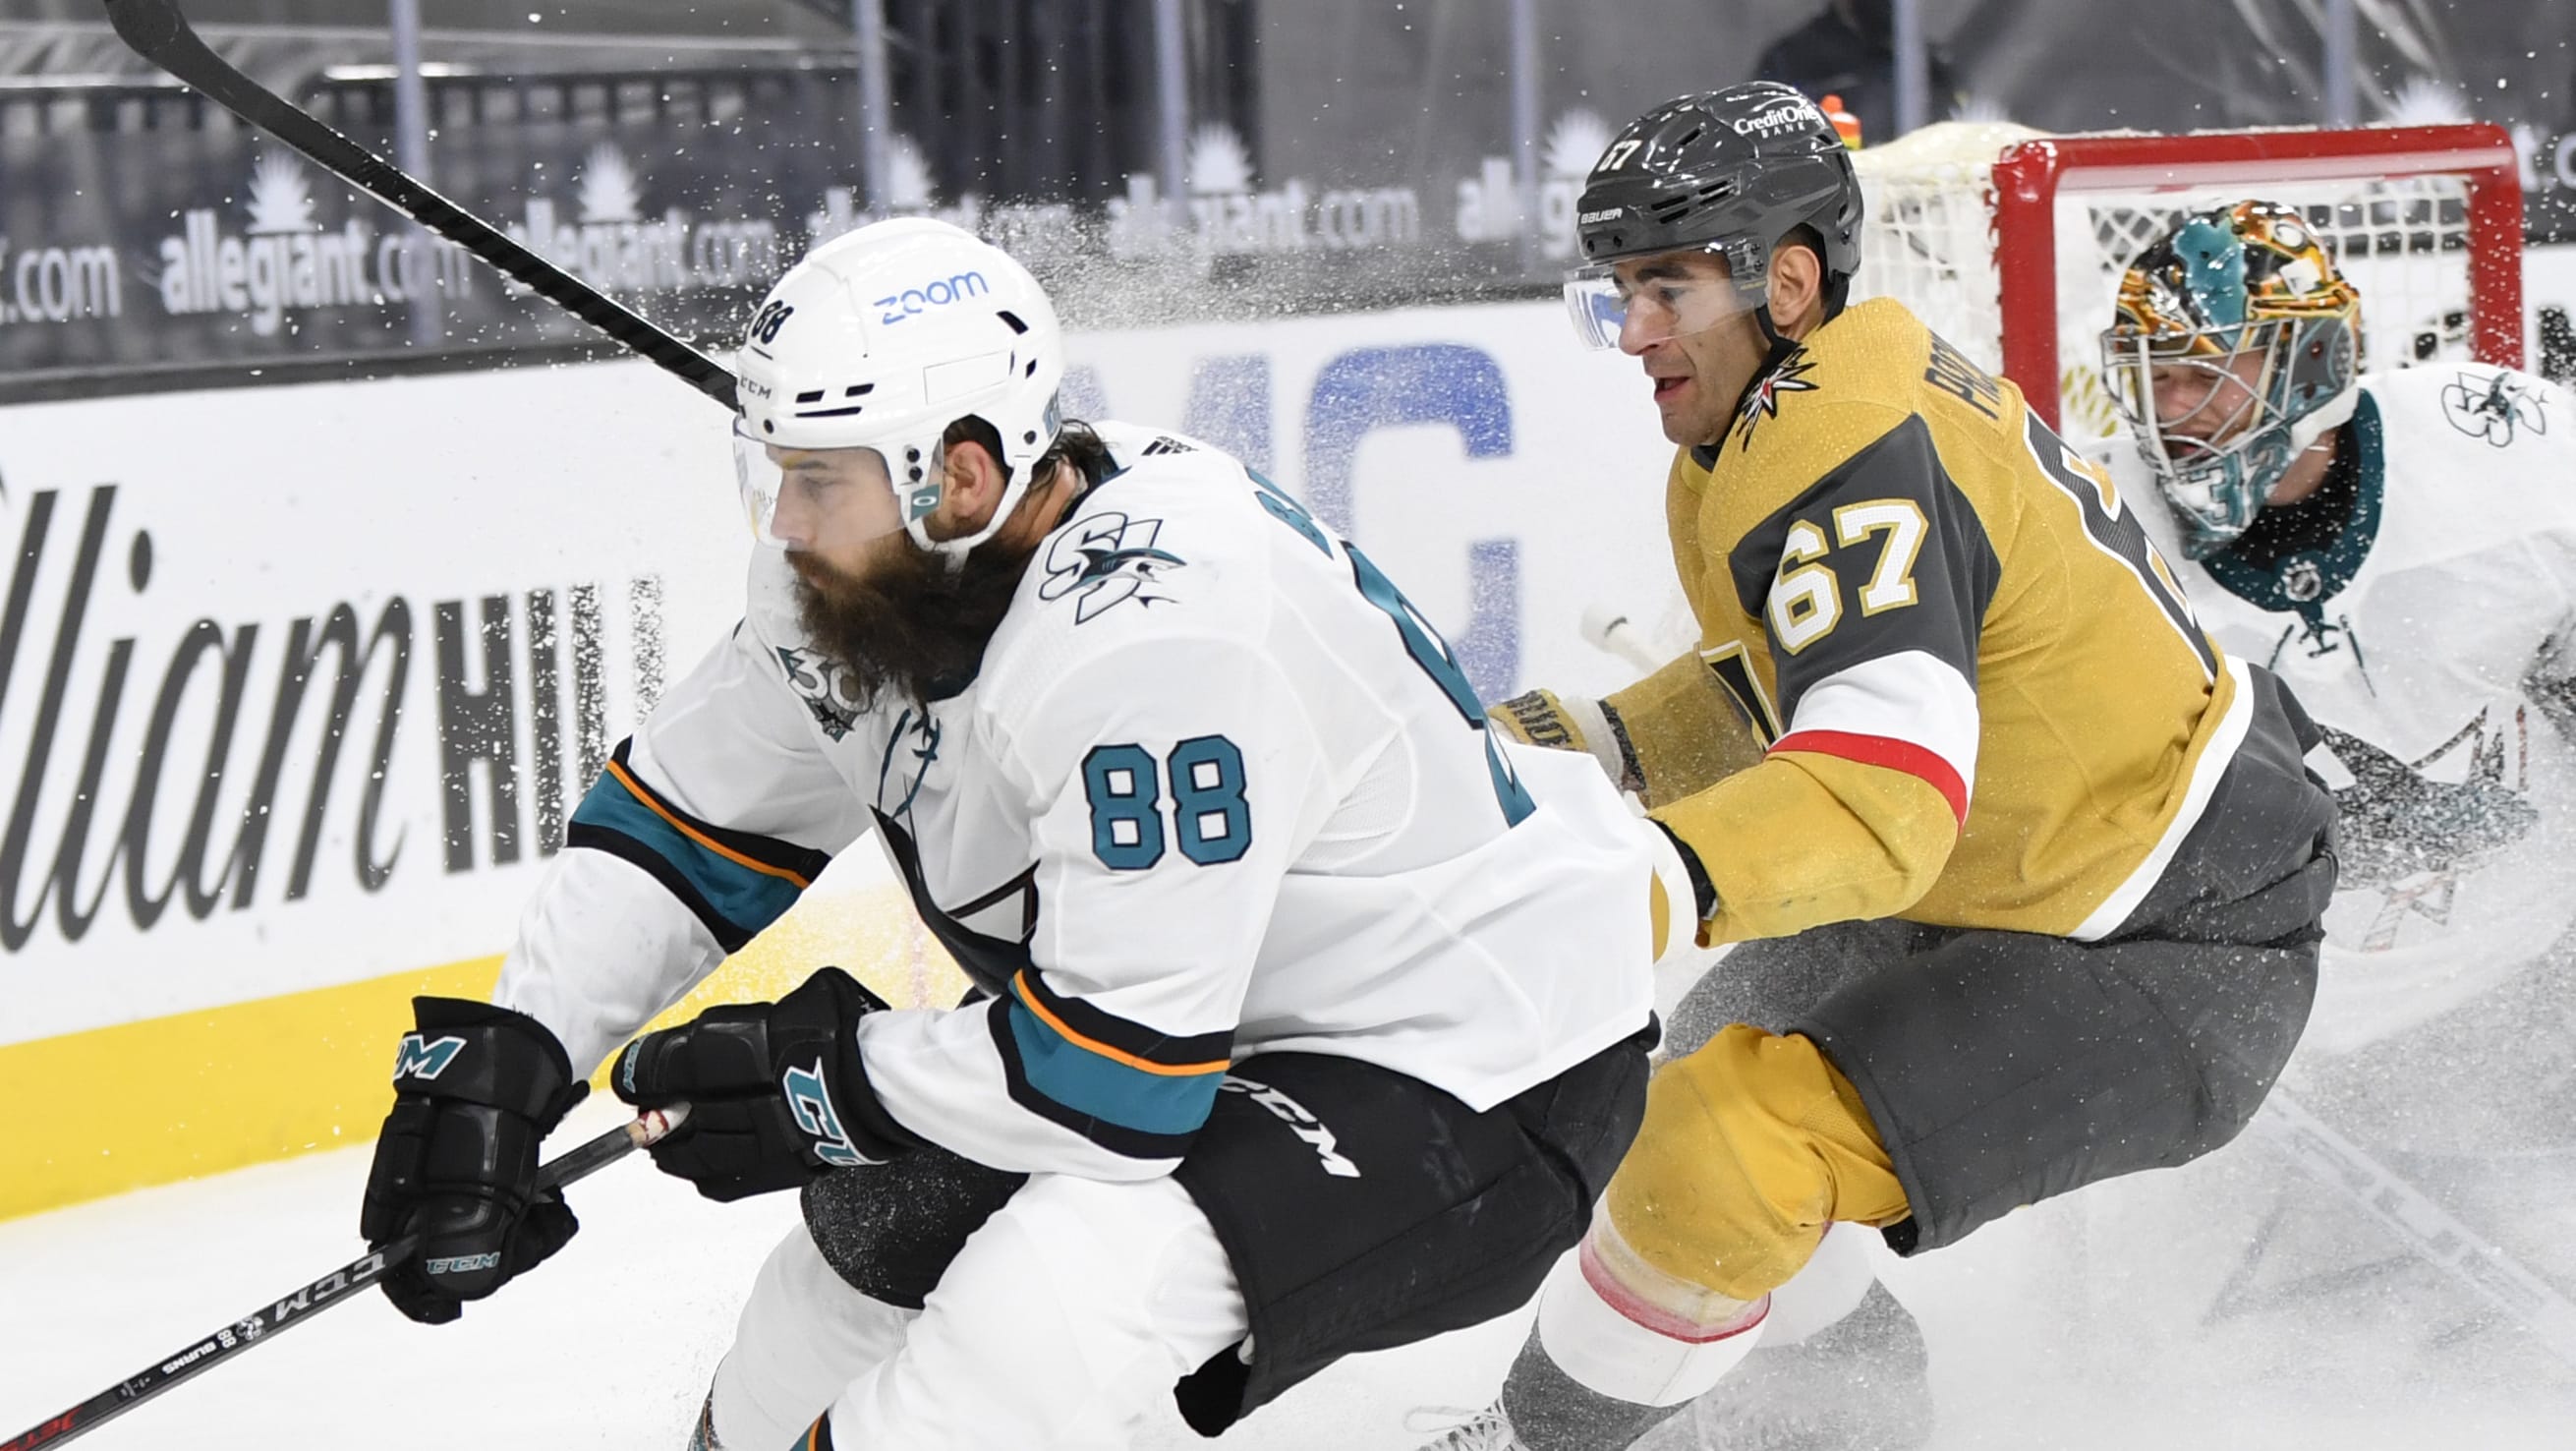 San Jose Sharks' Brent Burns is lucky and charmed - Sports Illustrated